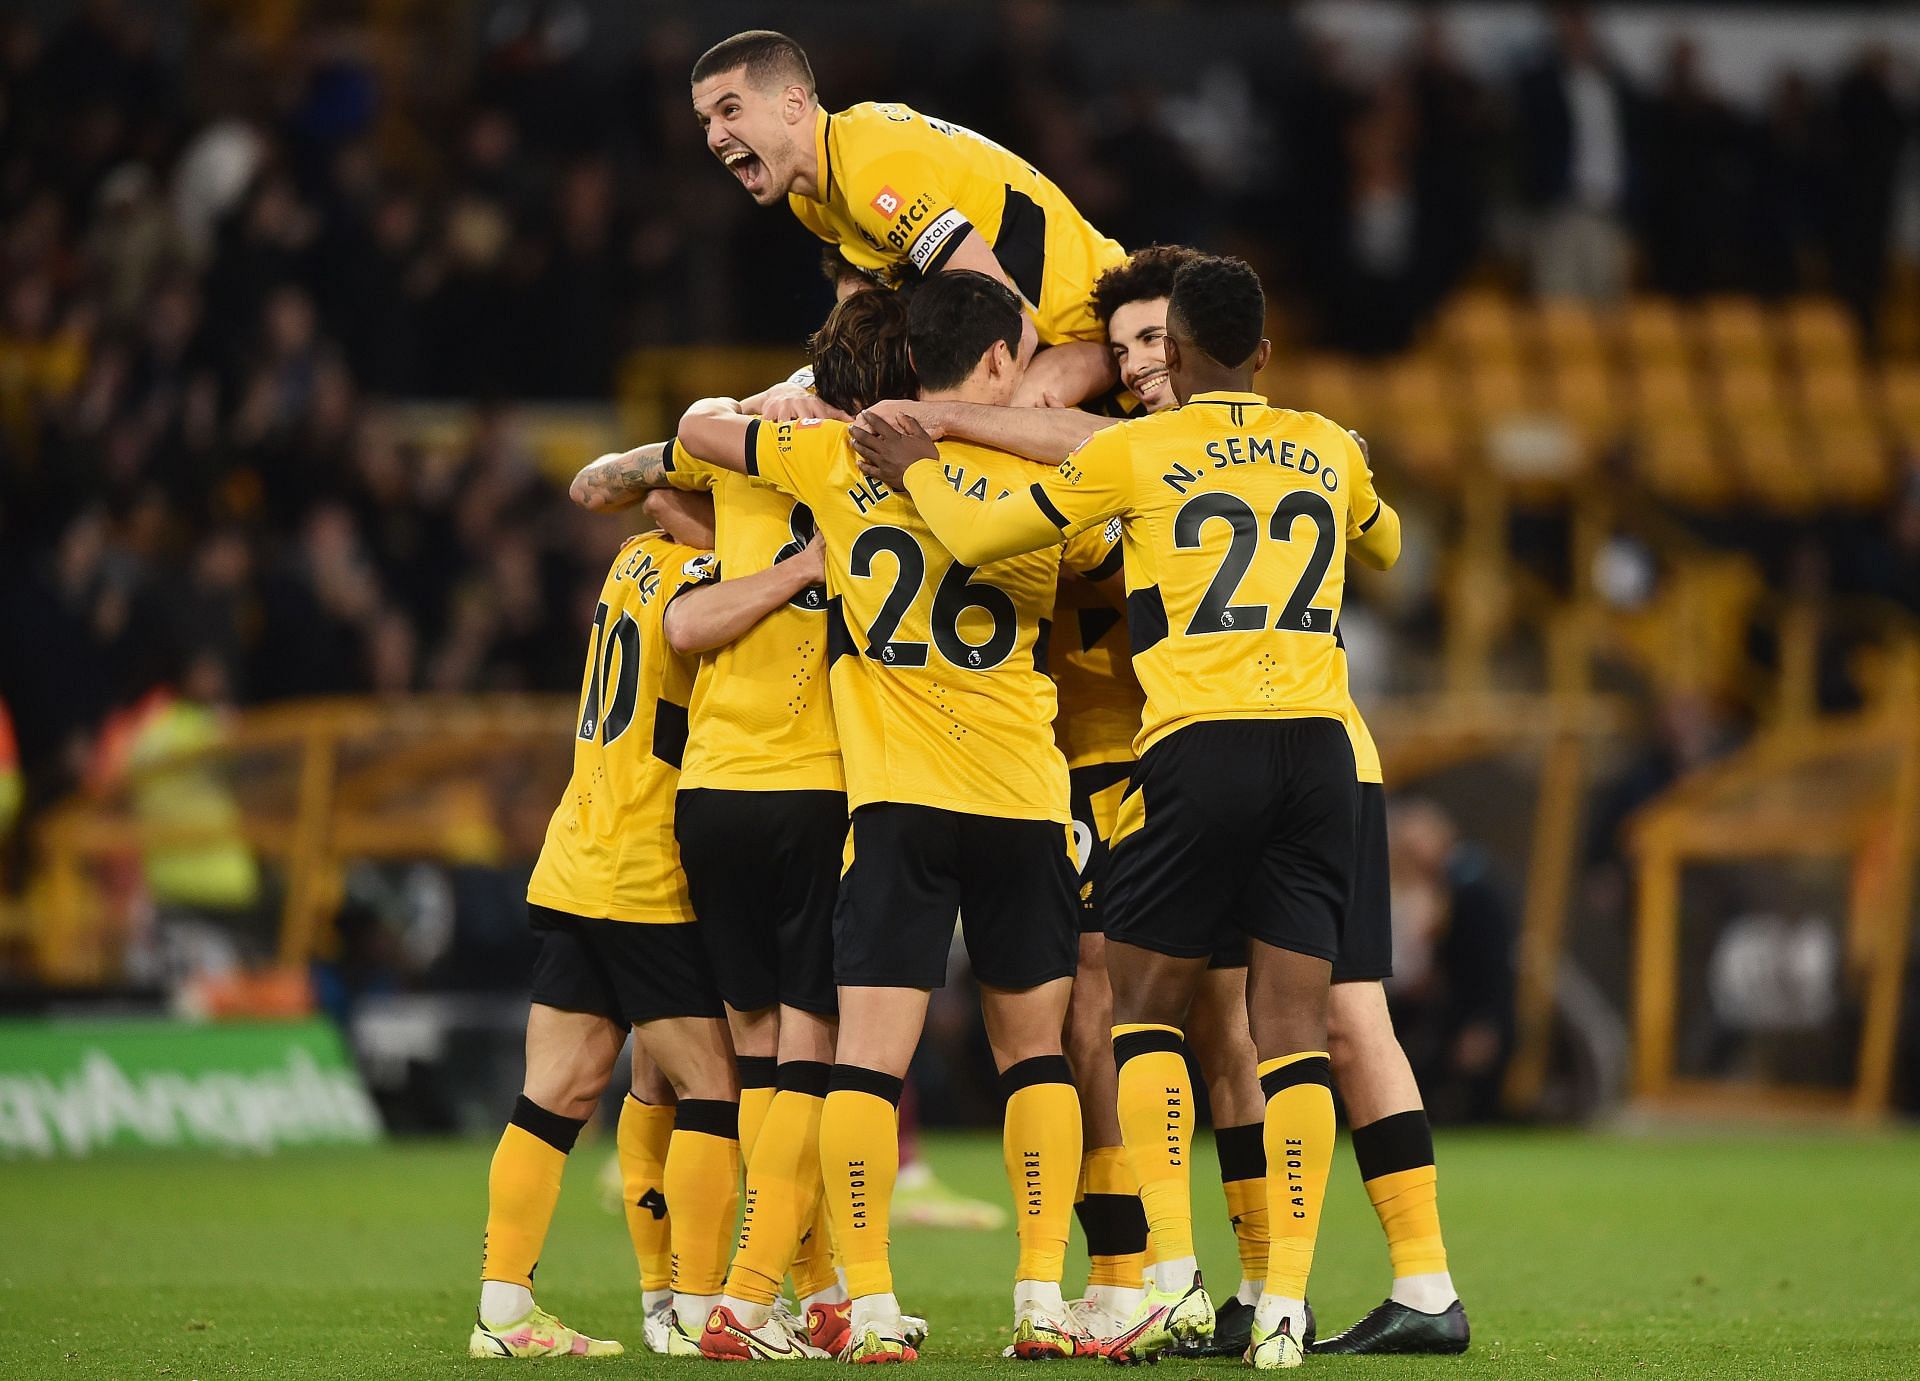 Wolves will look to continue their strong run of form